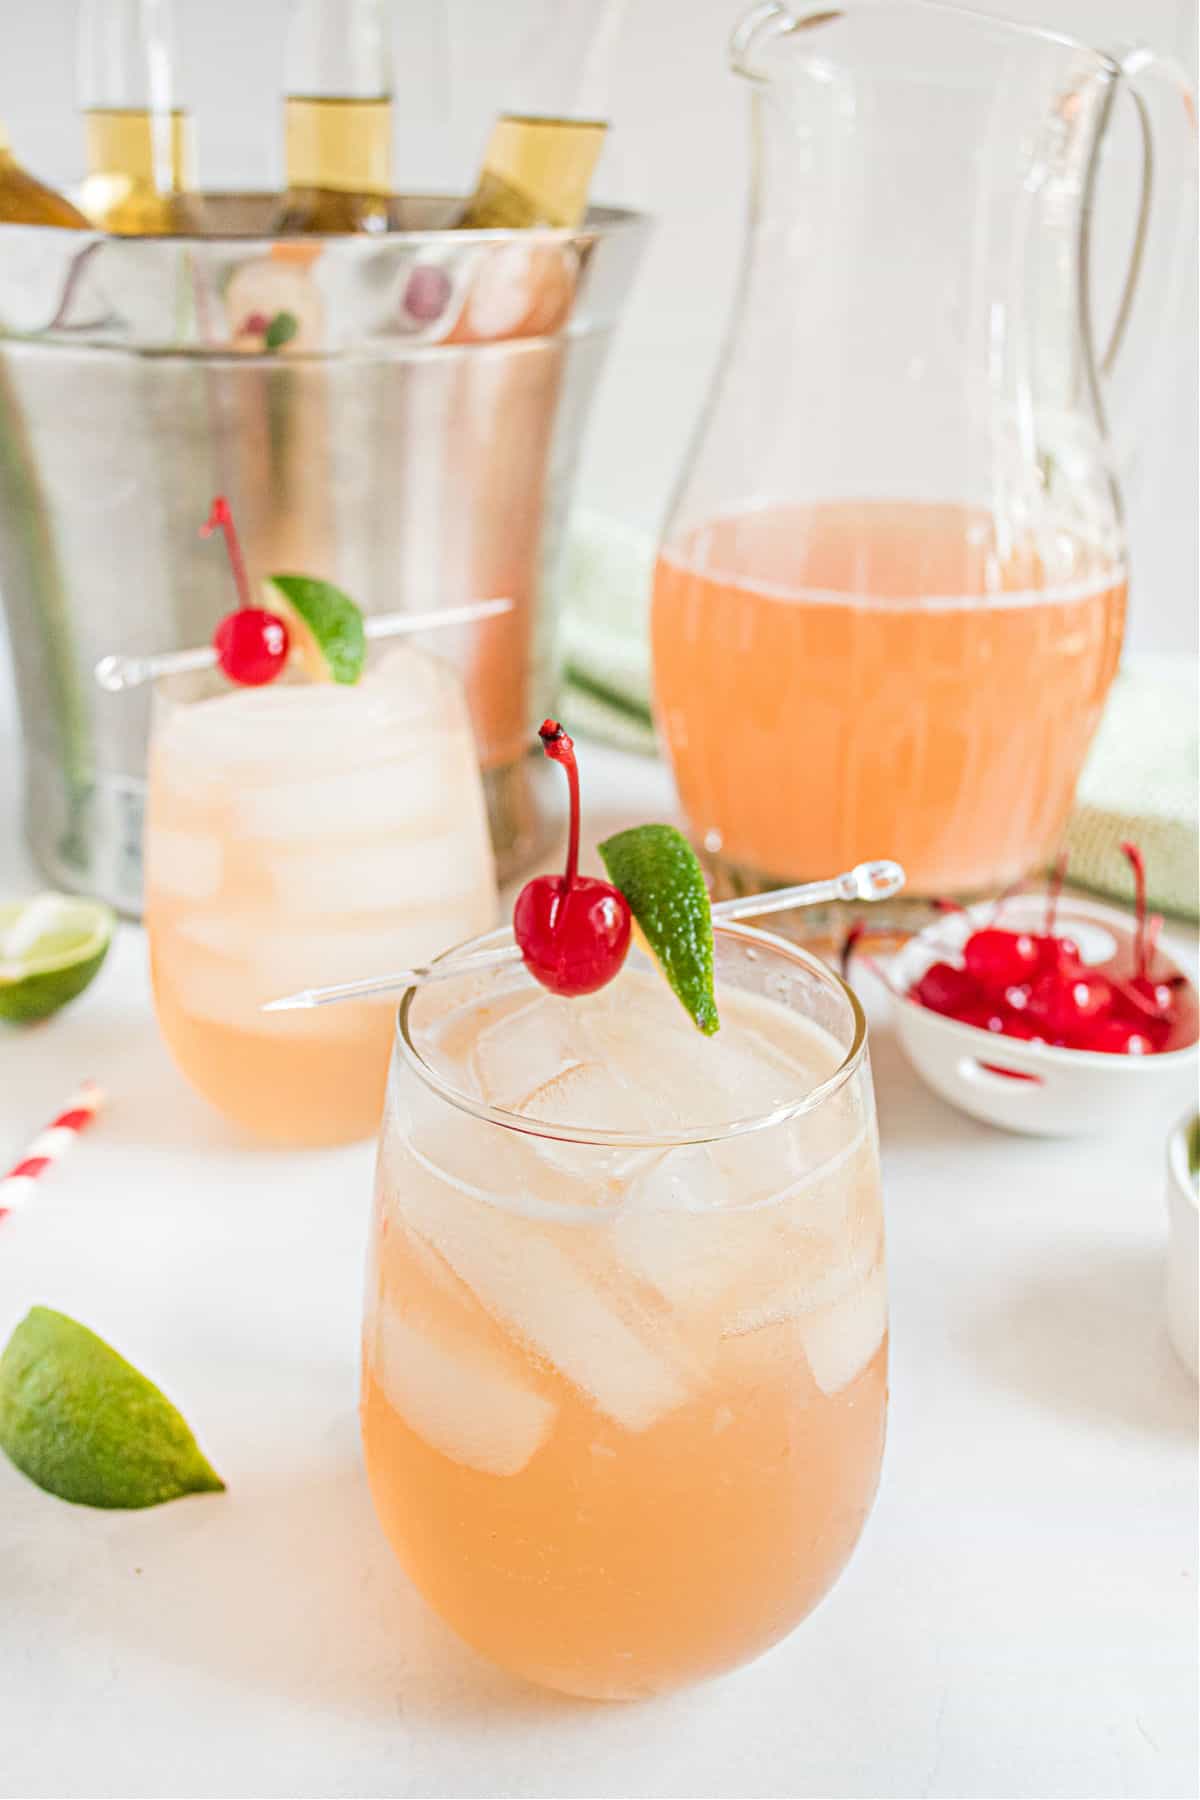 Cherry margaritas in a glass garnished with lime and maraschino cherries.